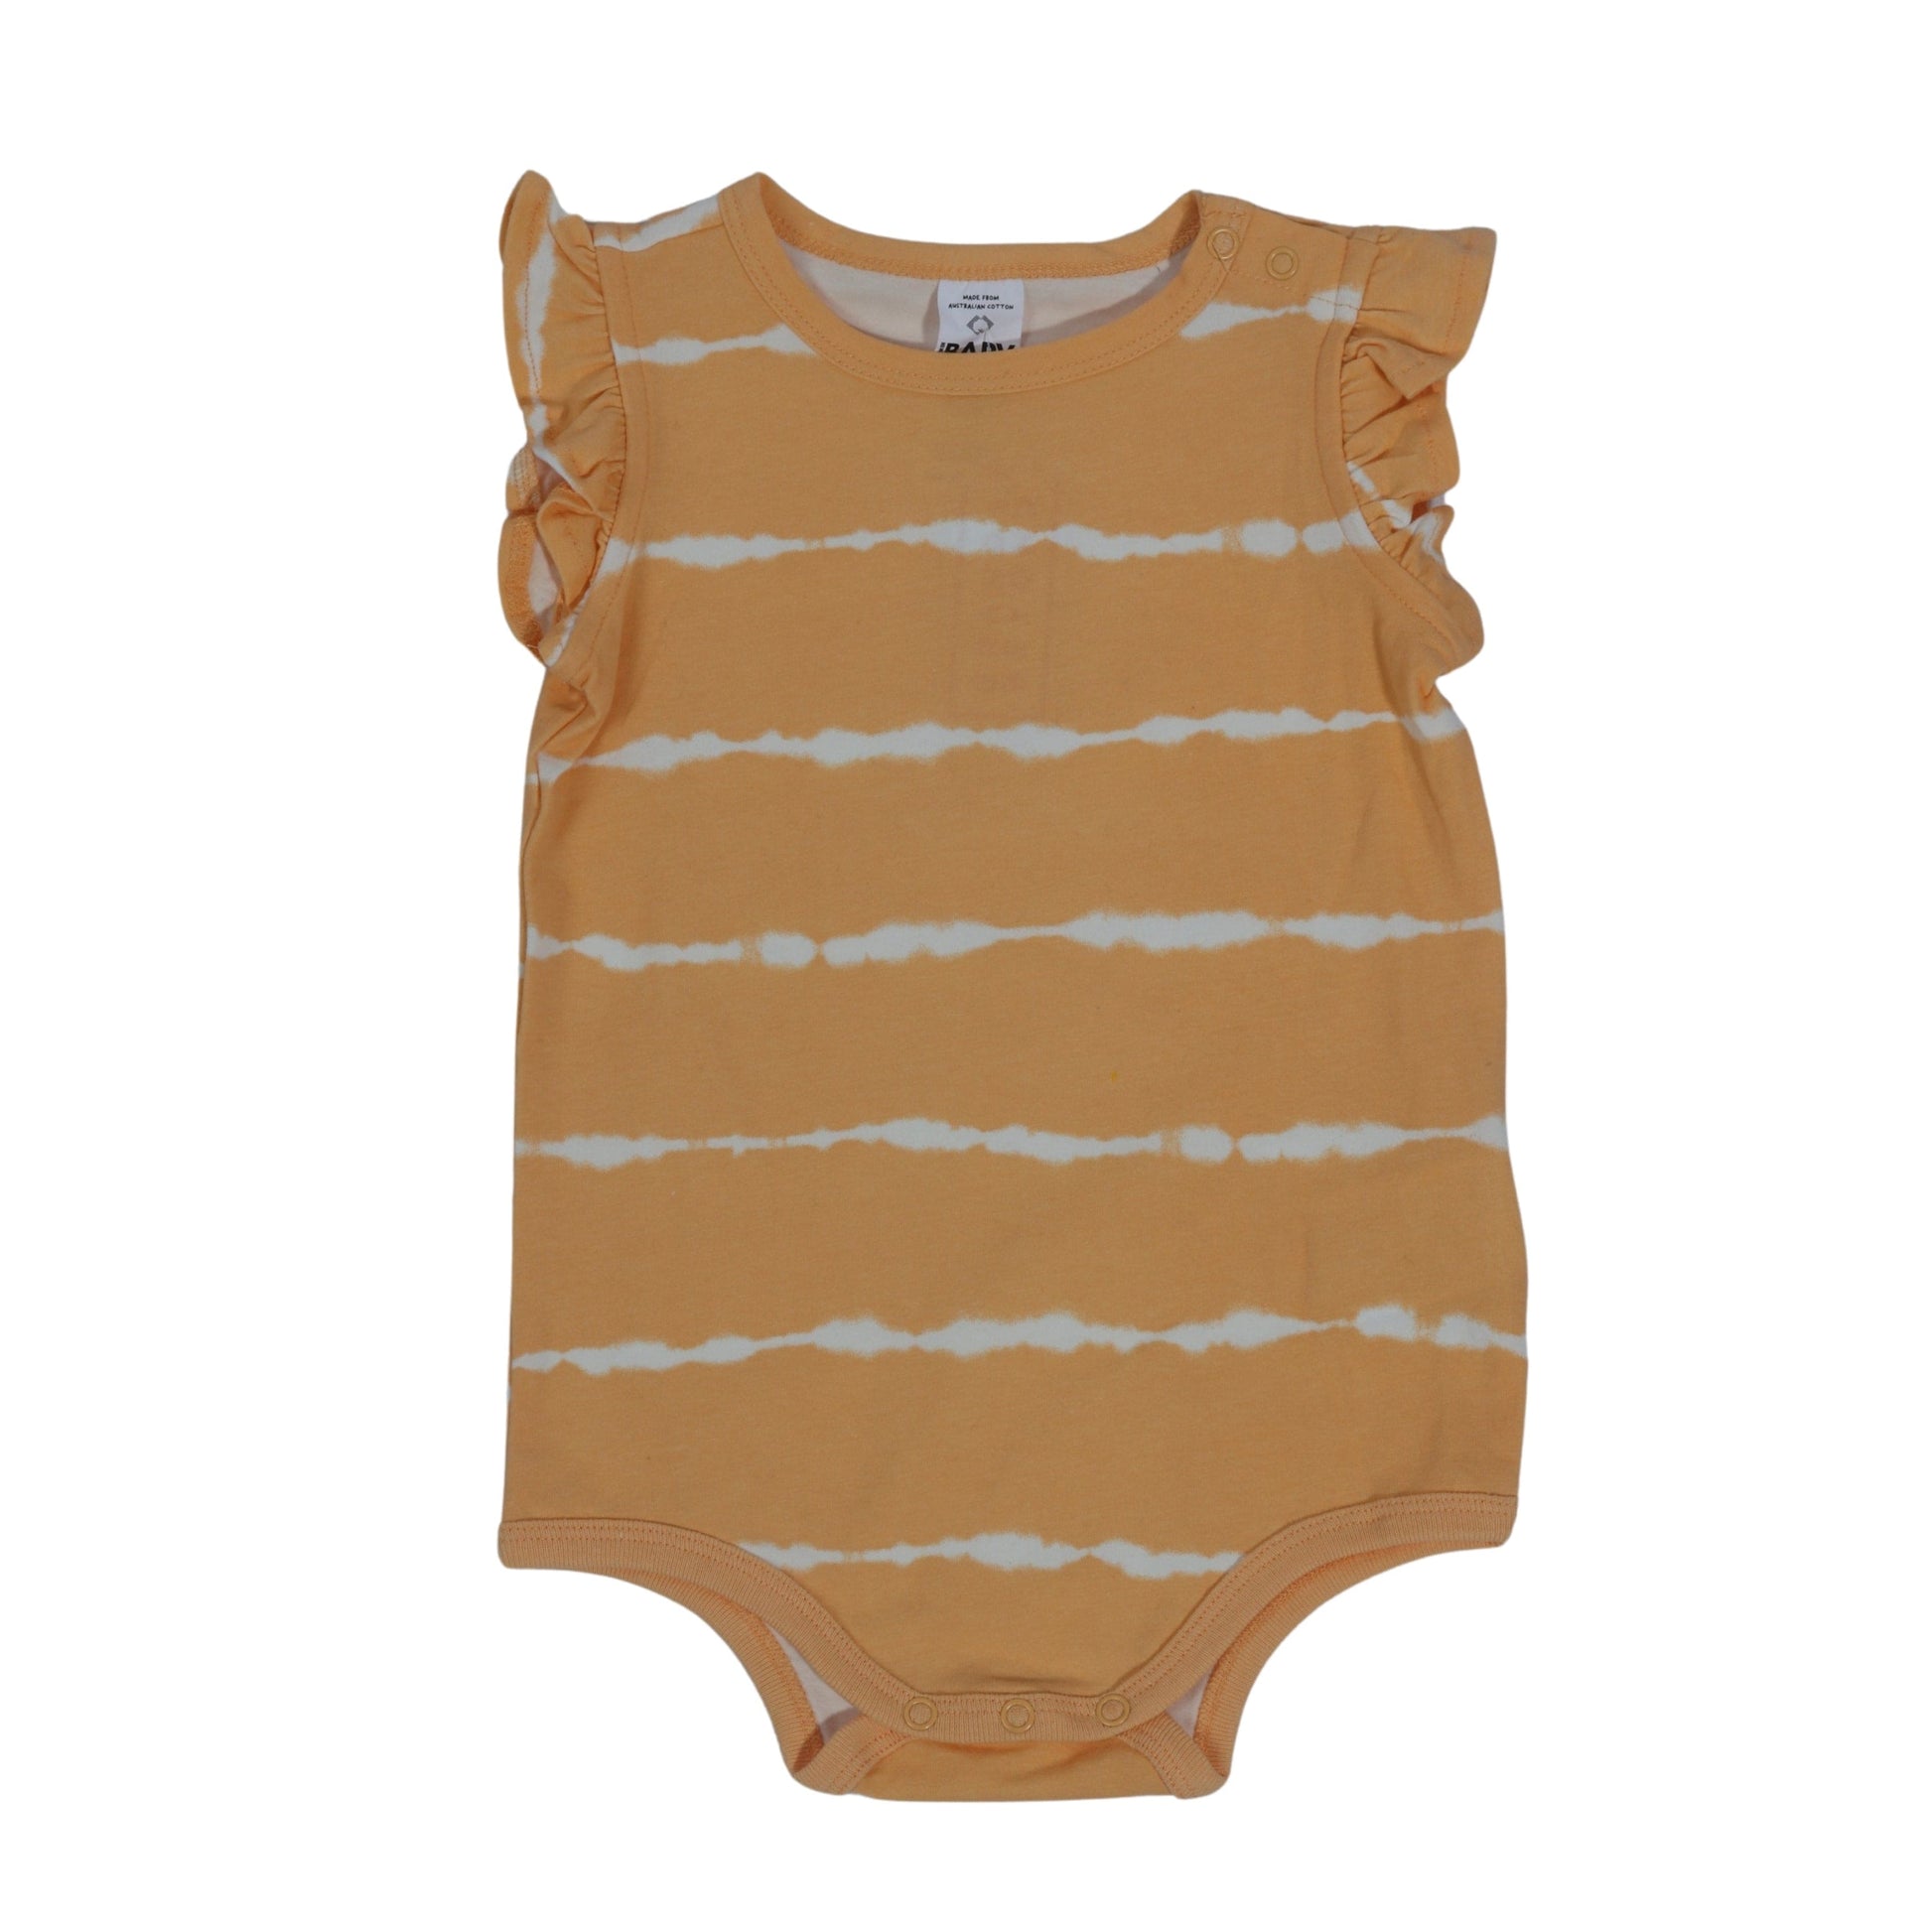 COTTON ON Baby Girl 18-24 Month / Orange COTTON ON - BABY - Pull Over Bodysuit